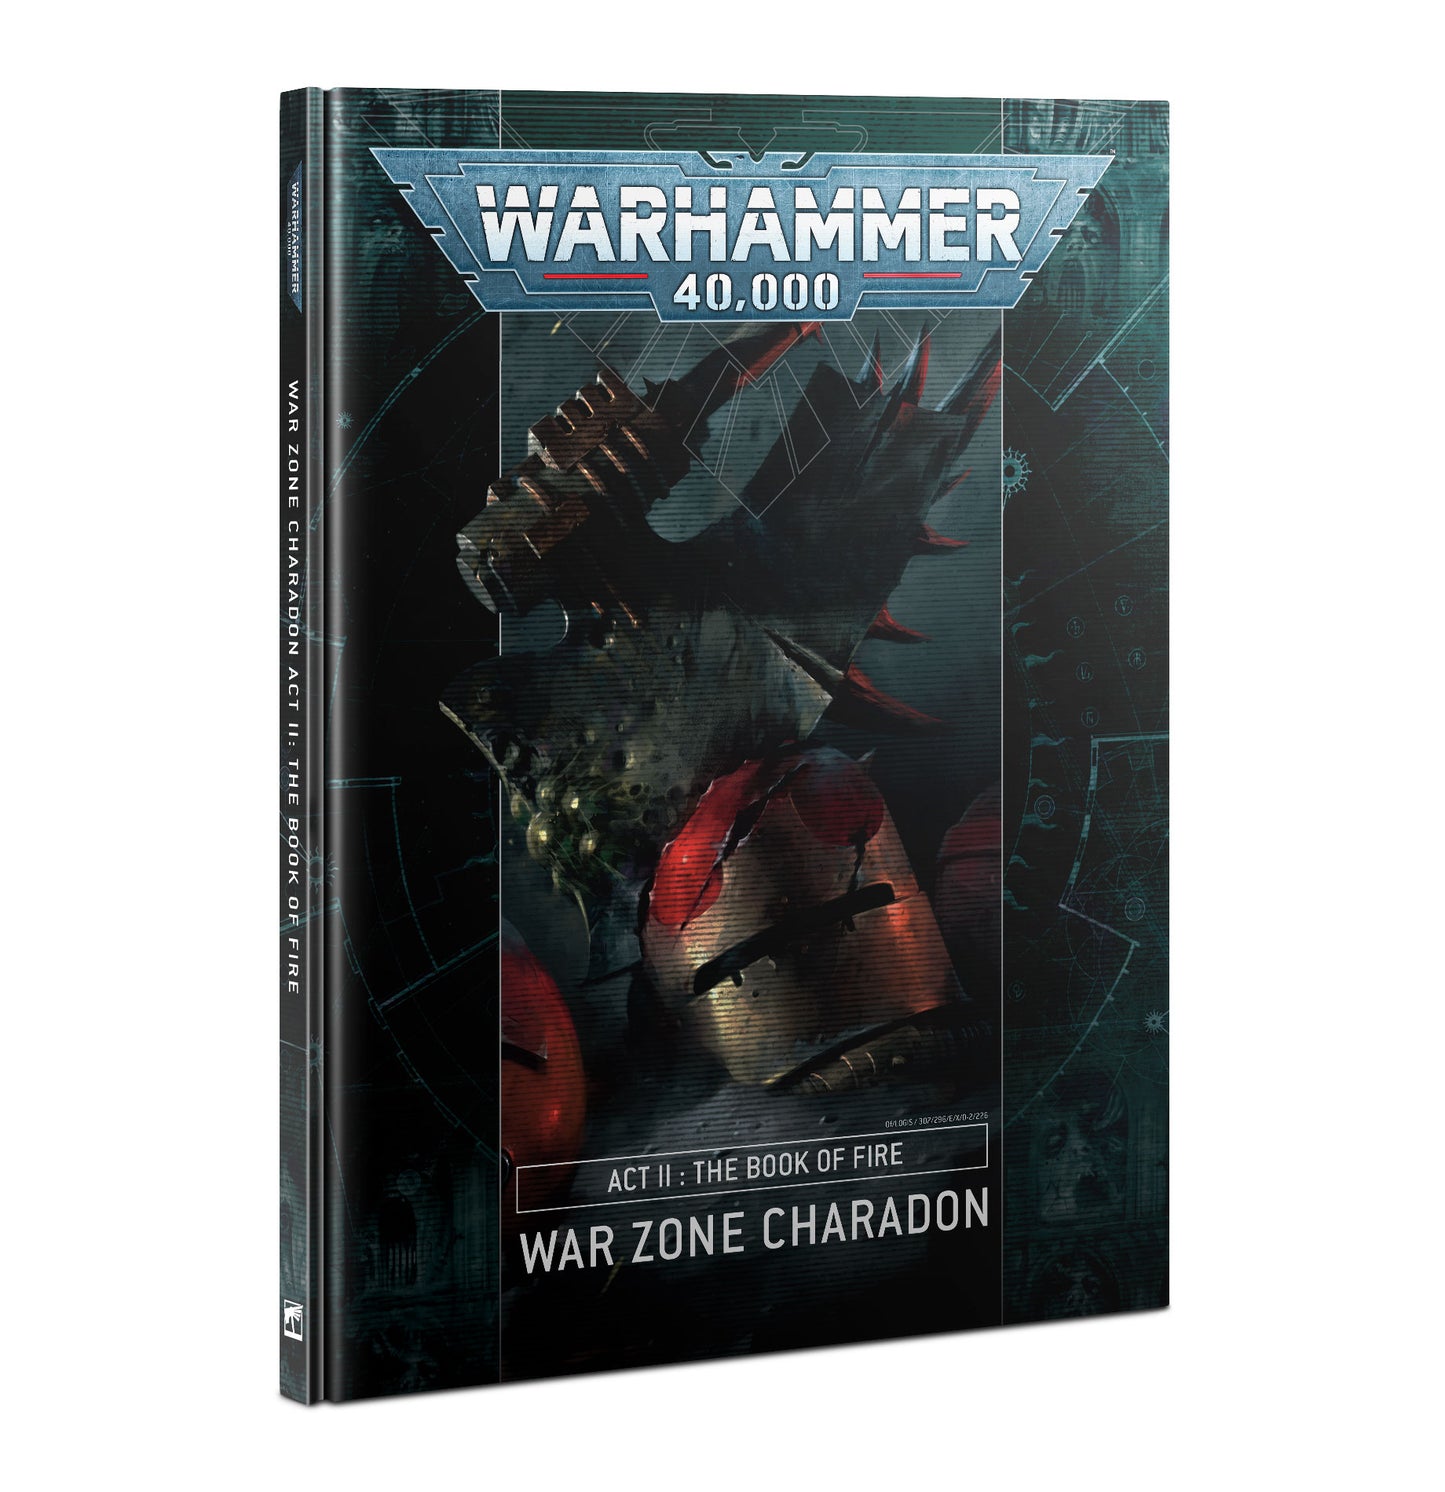 Warhammer 40000: War Zone Charadon – Act II: The Book of Fire Collector's Edition